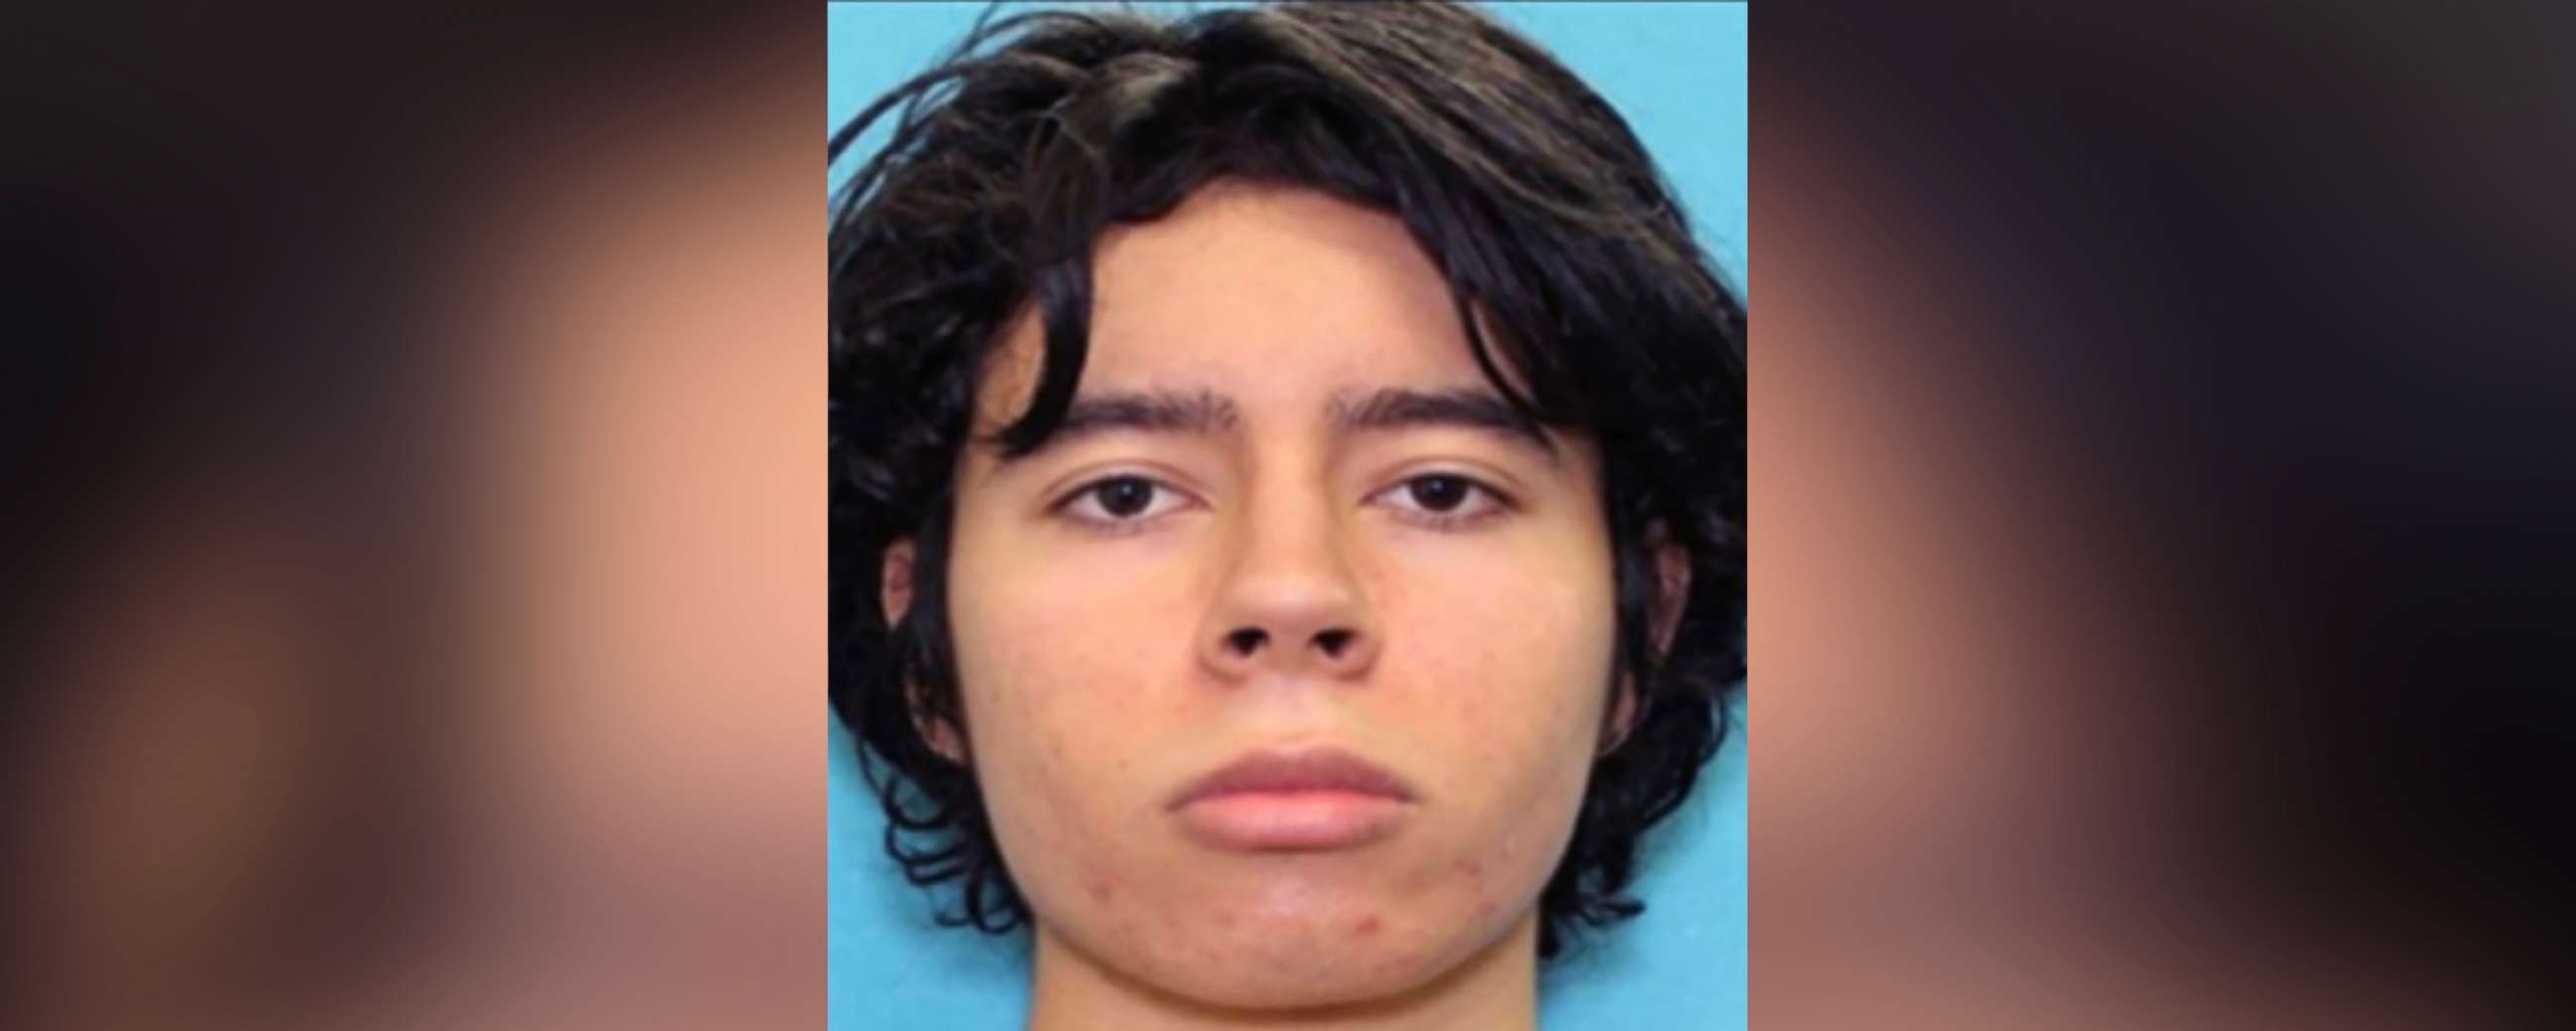 PHOTO: Law enforcement shared this photo of 18-year-old Salvador Ramos, a student at Uvalde High School, who has been identified as the alleged gunman in the Robb Elementary School shooting on May 24, 2022, in Uvalde, Texas.